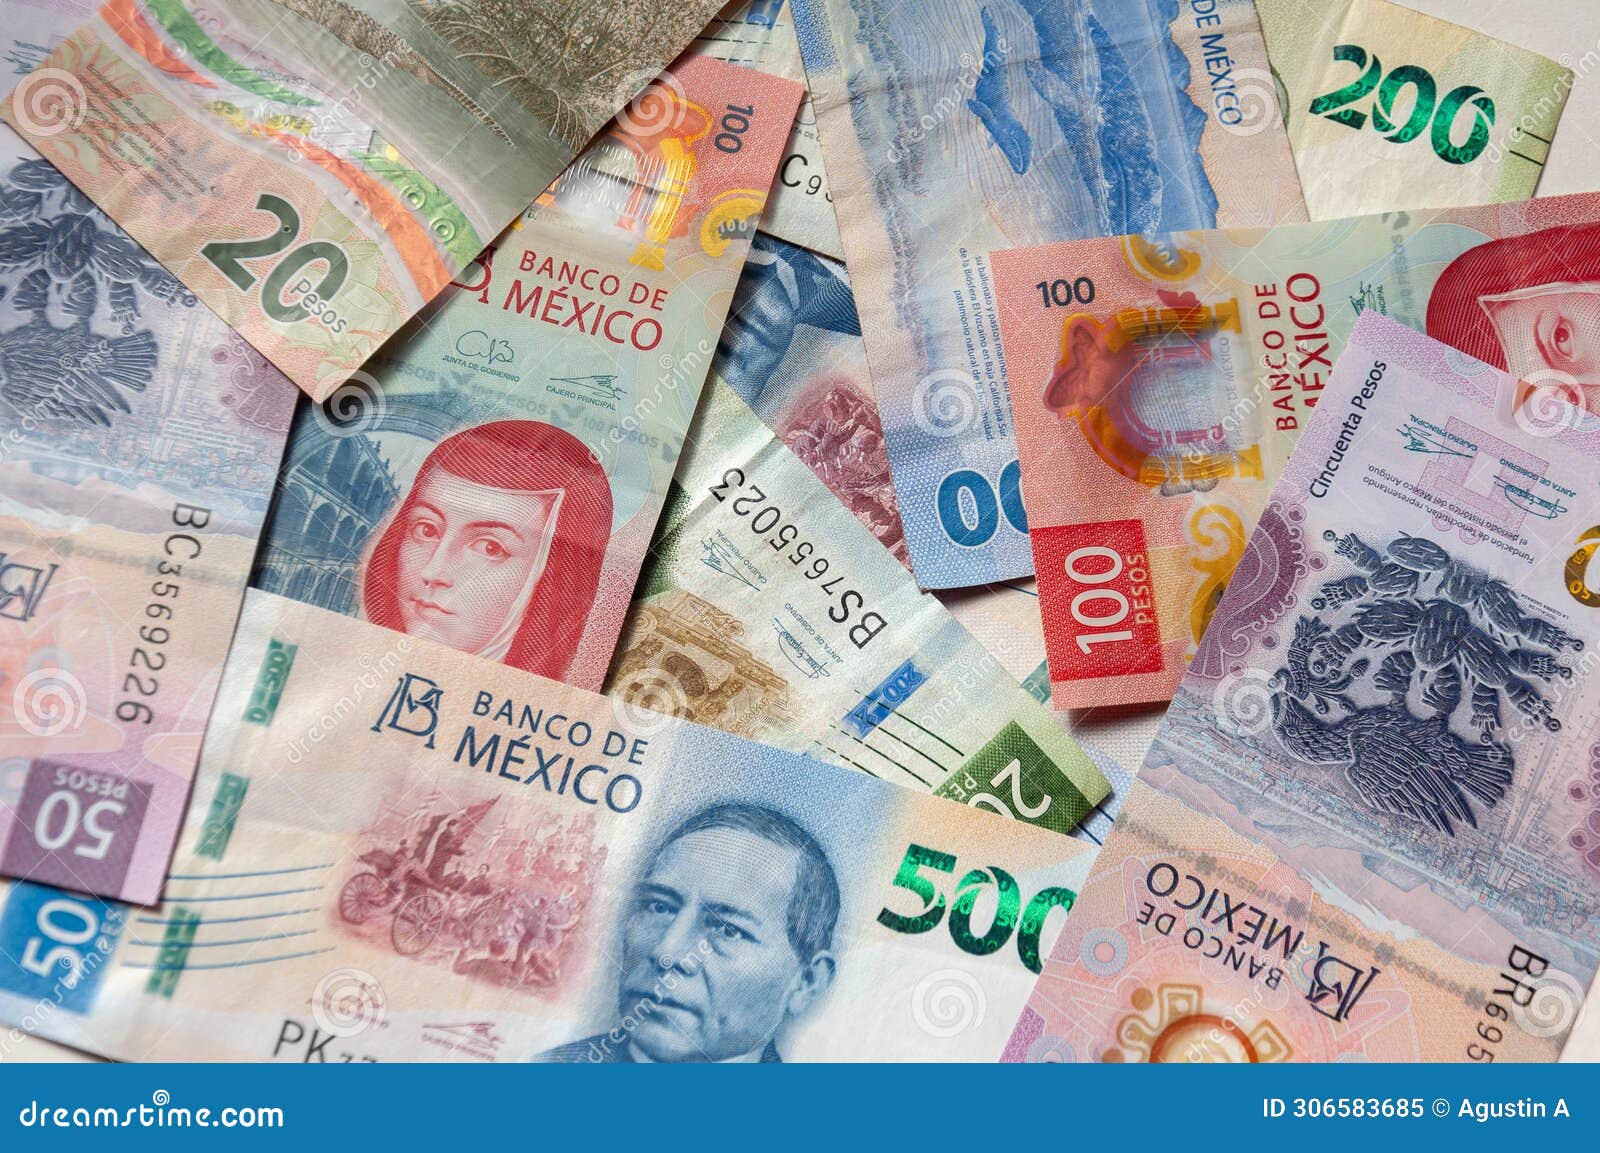 mexican bills stacked front view in different denominations